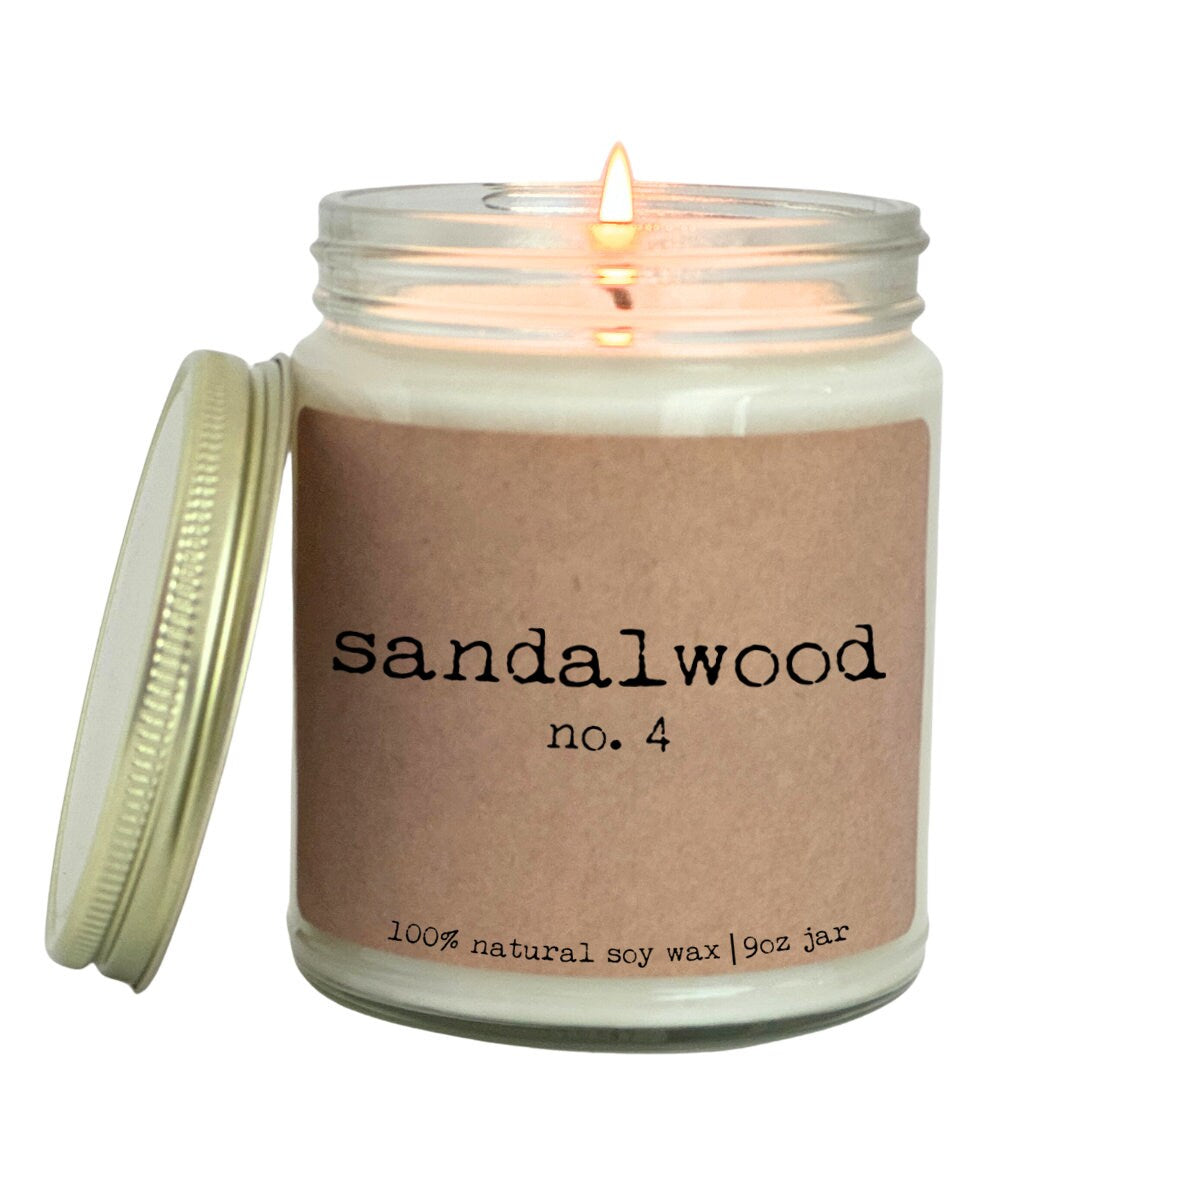 sandalwood candle in a jar with a lid